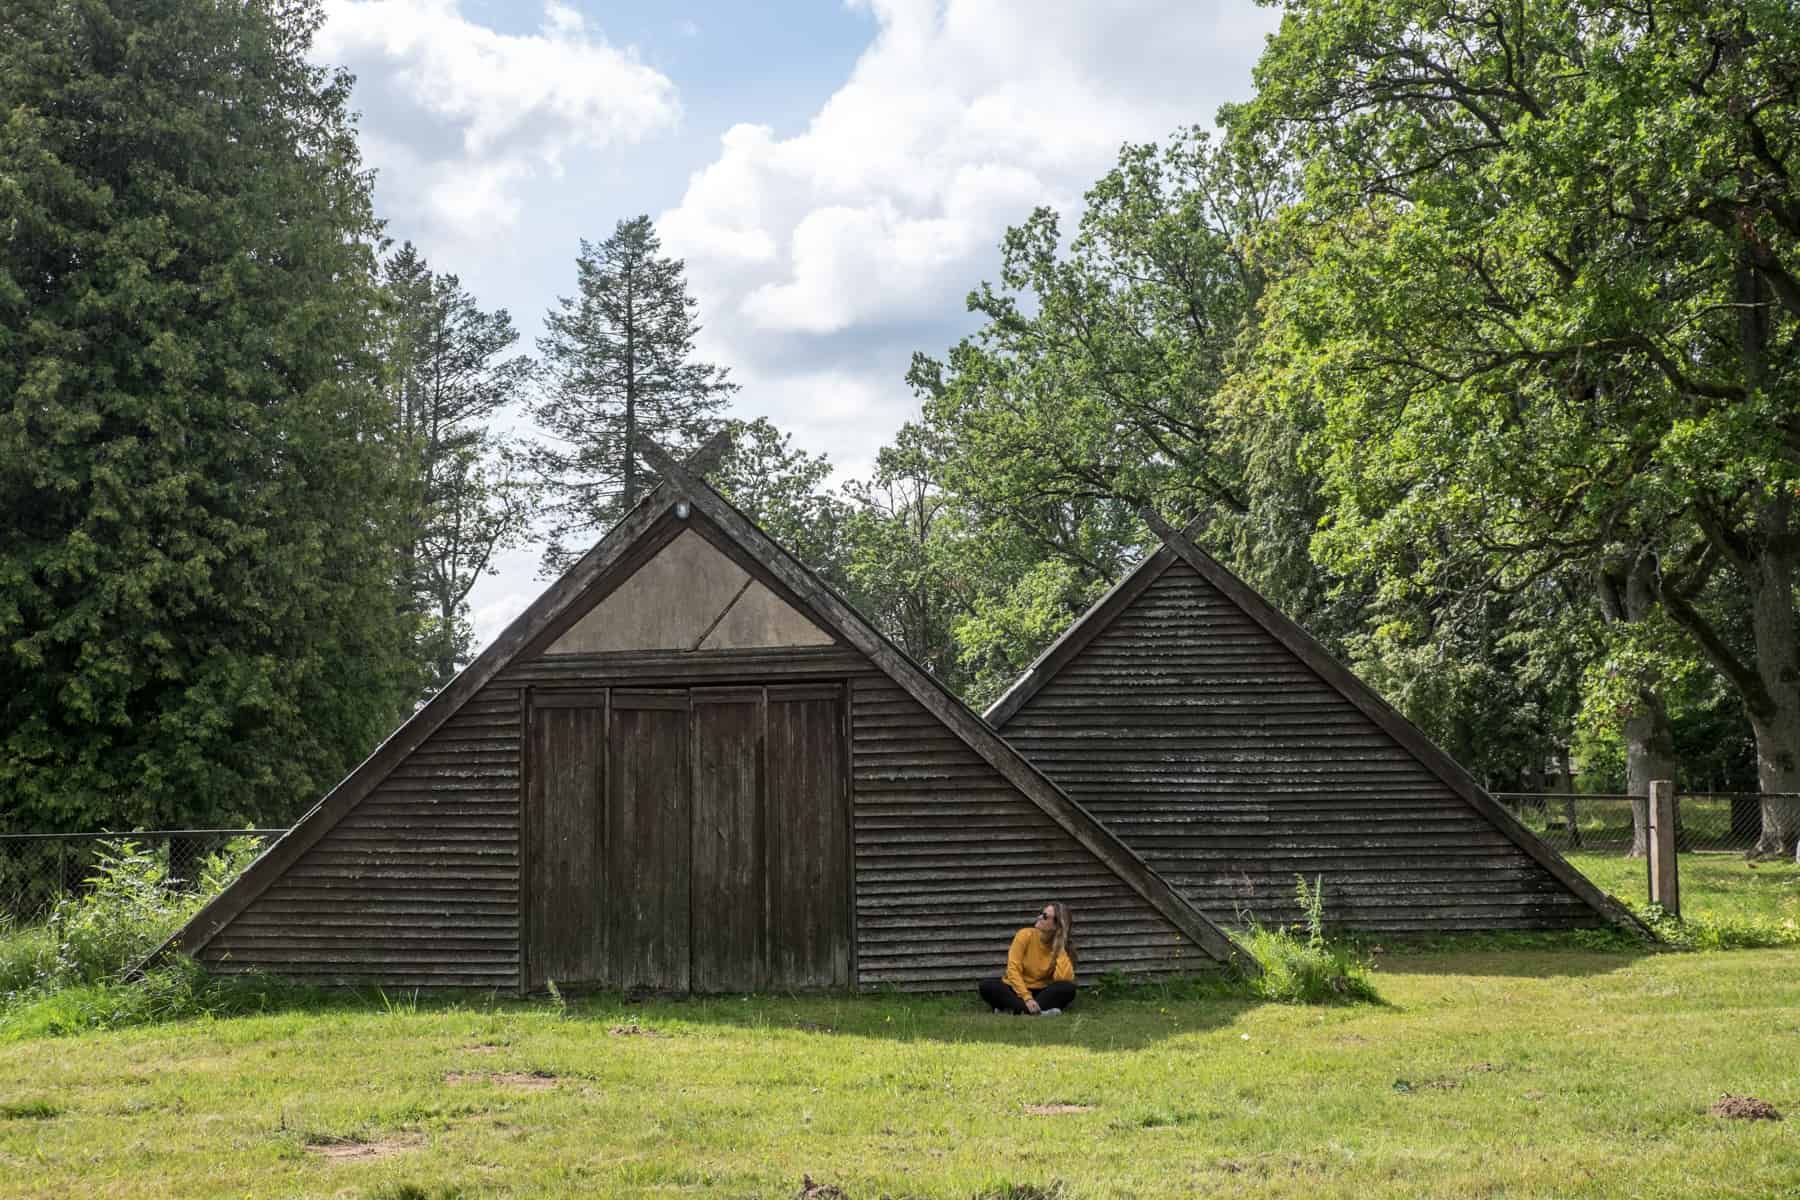 A woman in a yellow jumps sits on the grass in front of a brown, wooden triangular building, in the parkland of Sigulda, Latvia 